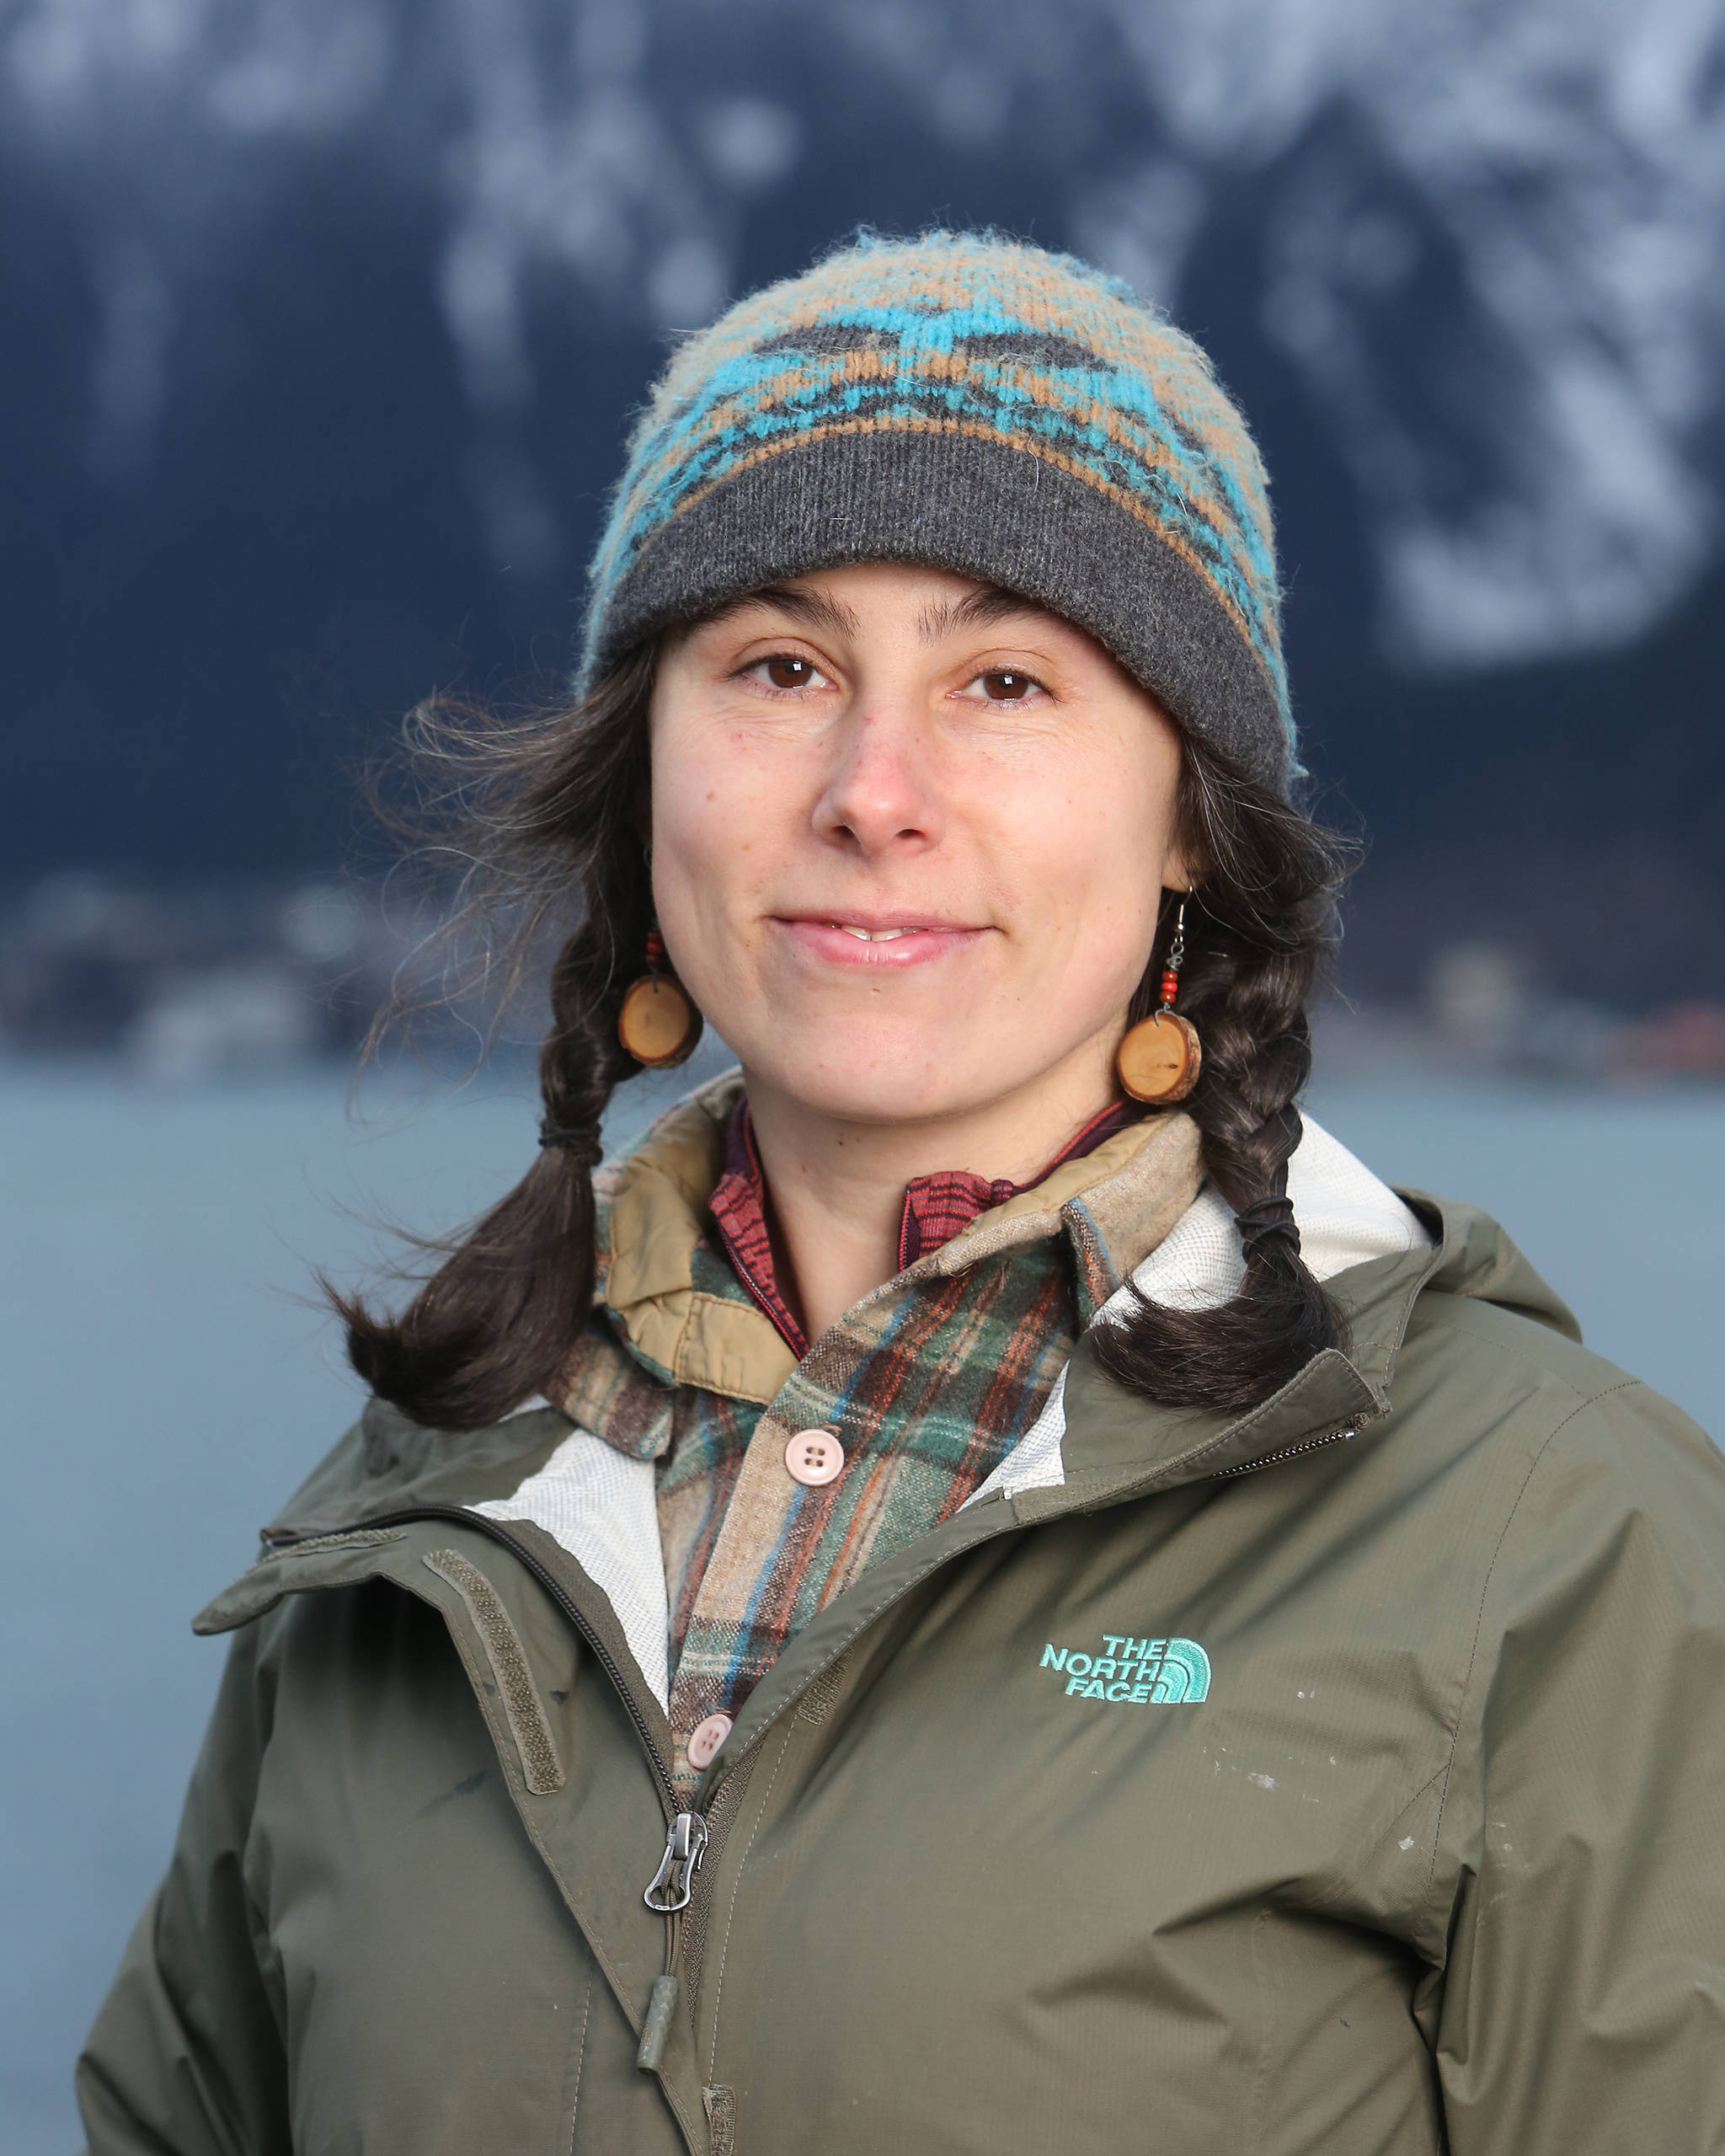 Lisa Daugherty of Juneau Composts says composting is an important way for Juneau to address both climate change and a rapidly filling local landfill. (Courtesy Photo / Brian Wallace for Juneau Climate Change Solutionists)